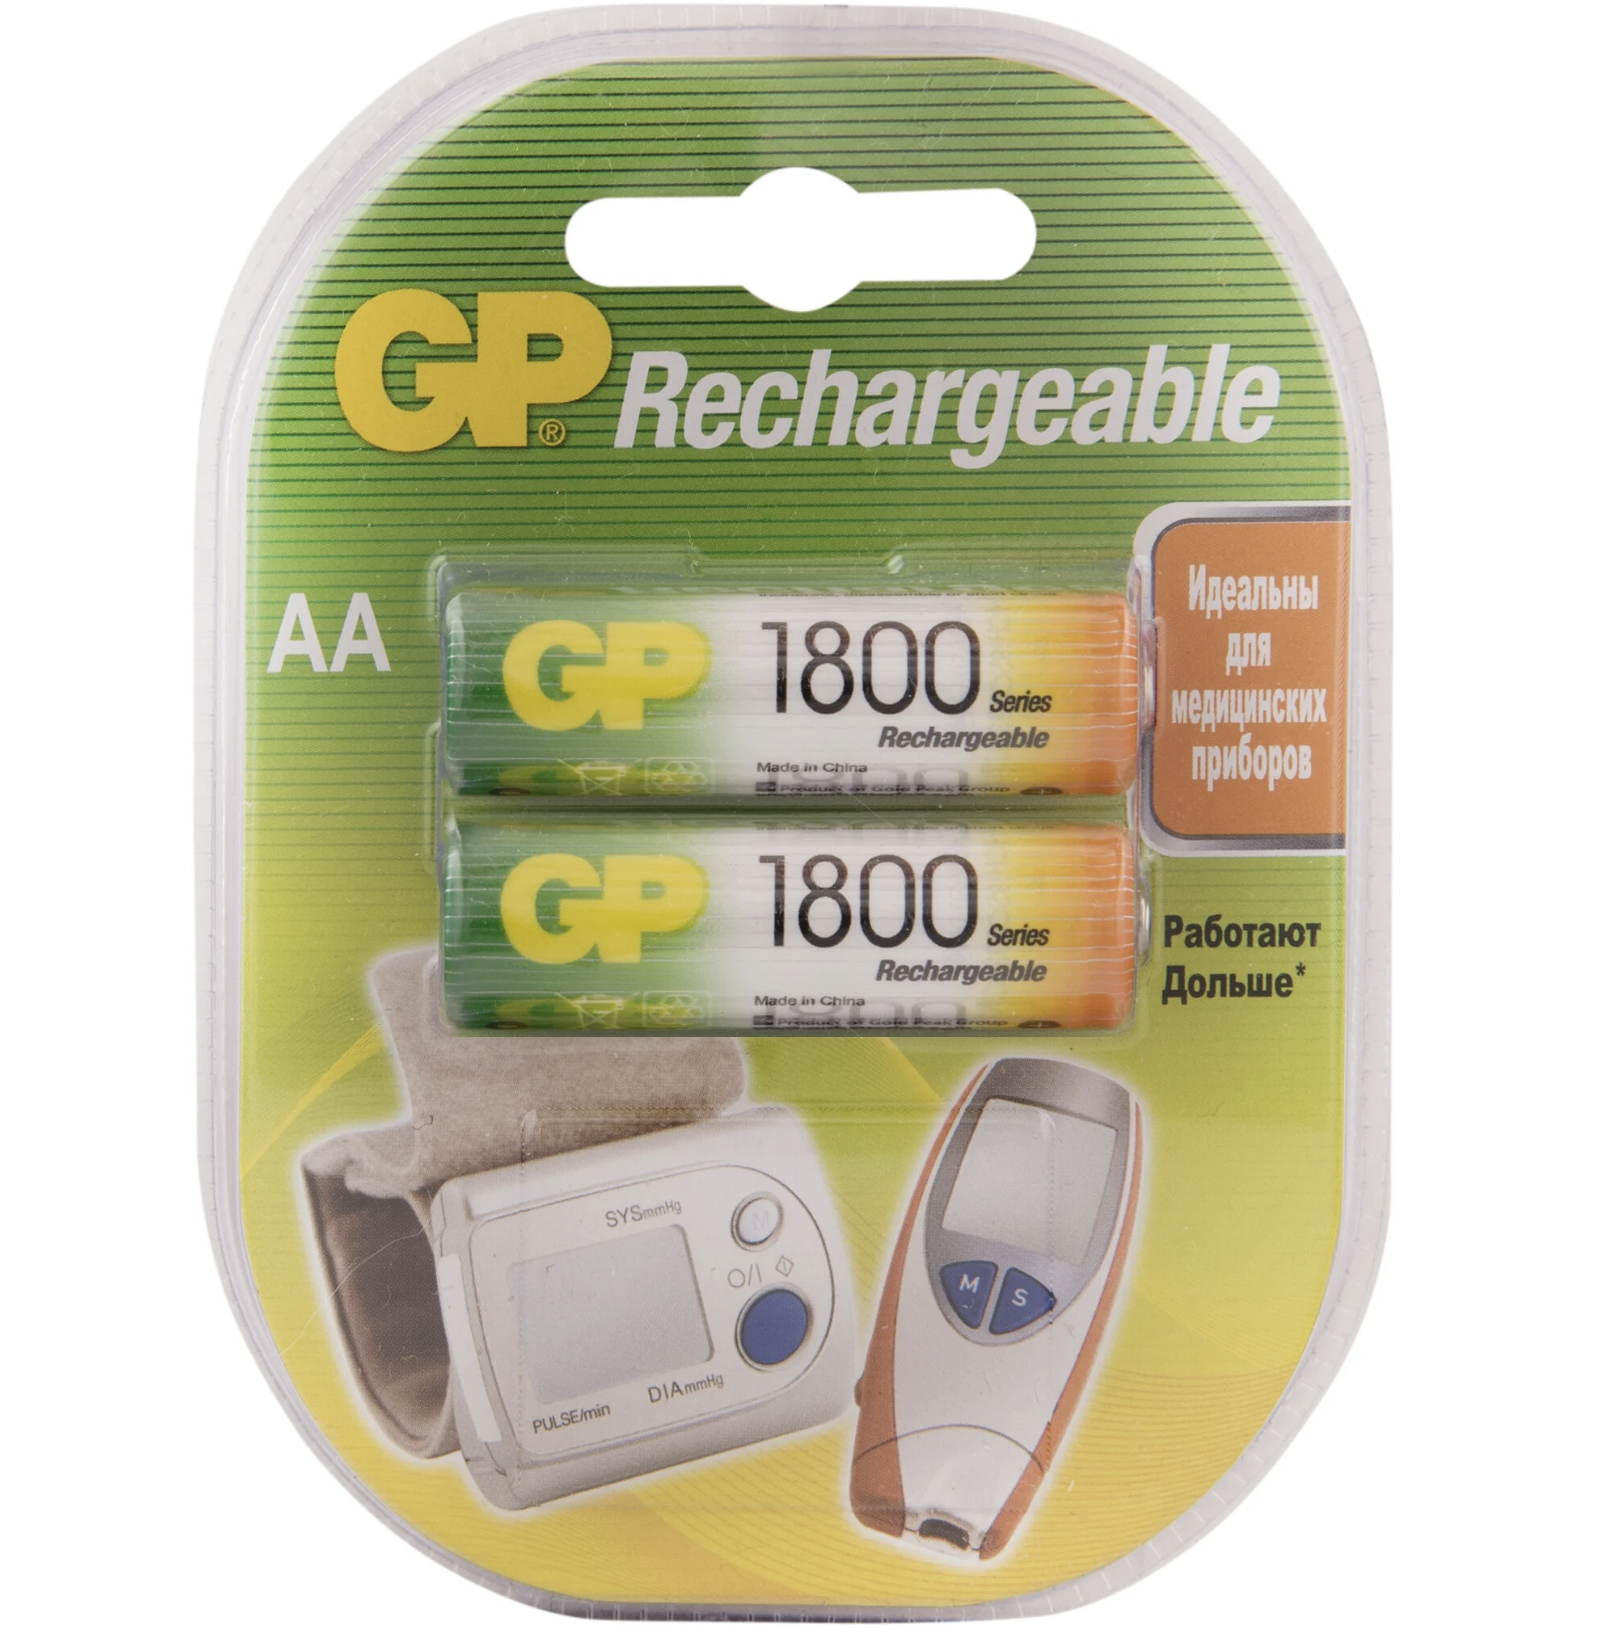  GP -  Rechargeable AA 1800 / 180AAHC/R6 2 